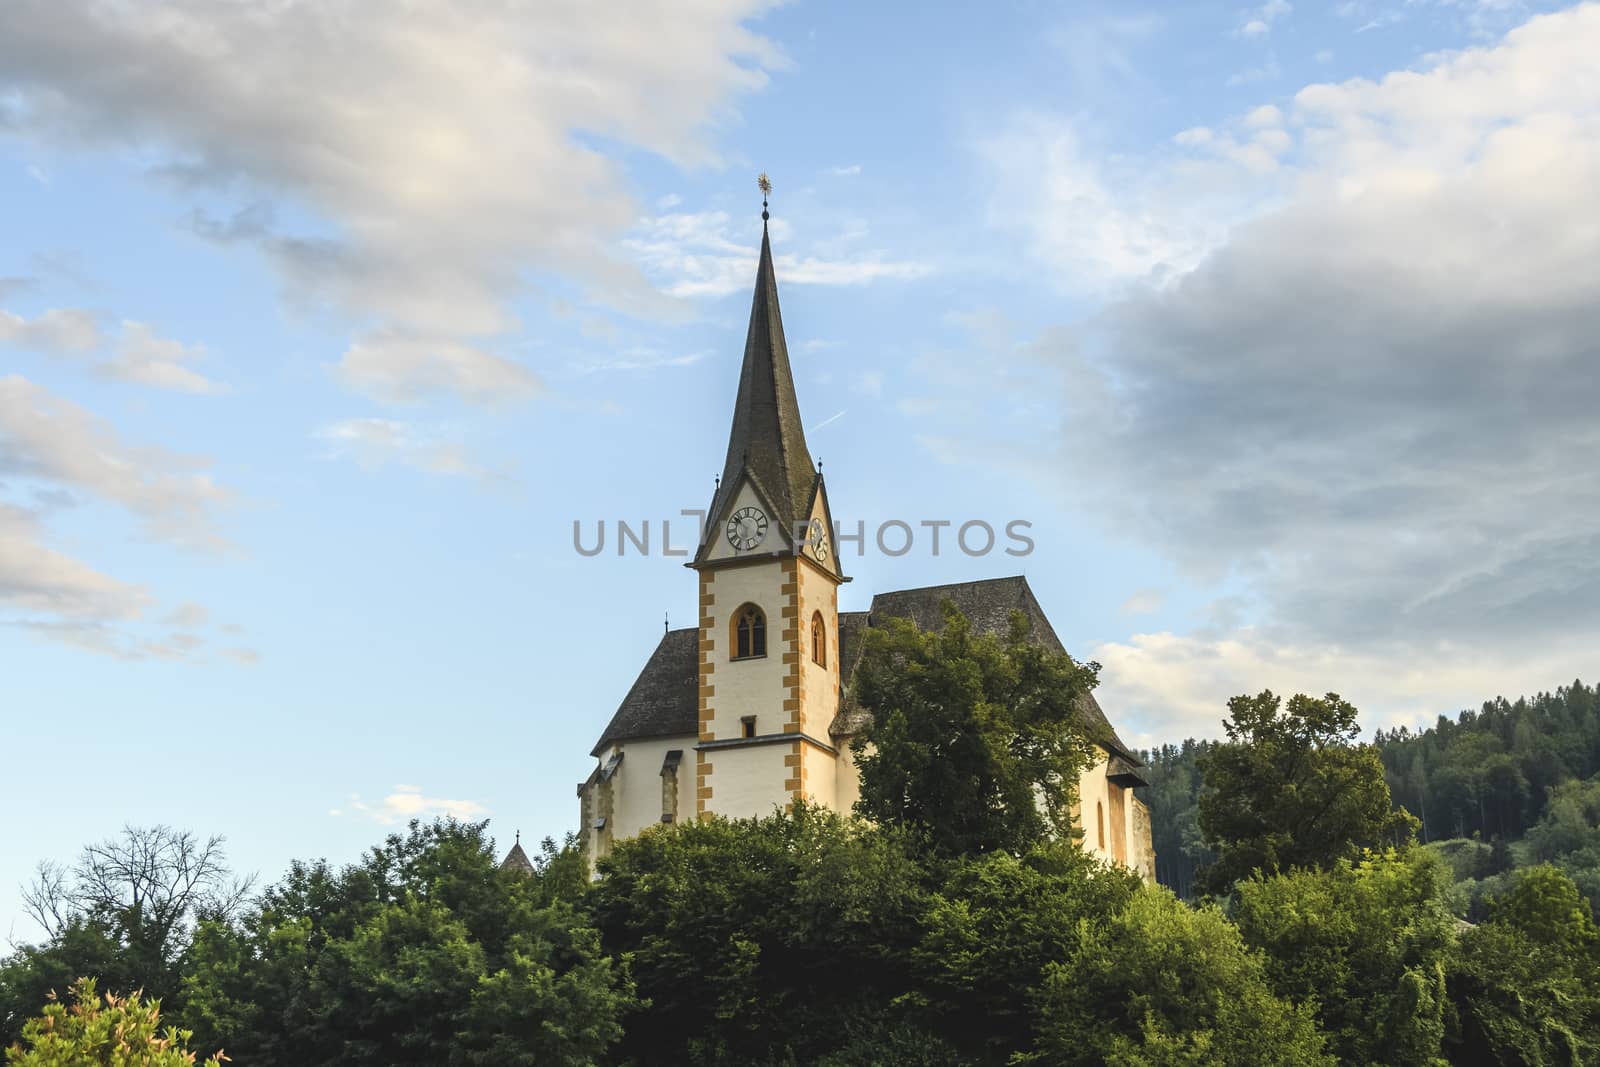 Saints Primus and Felician Church in Maria Worth, Carinthia, Austria on the Worthersee